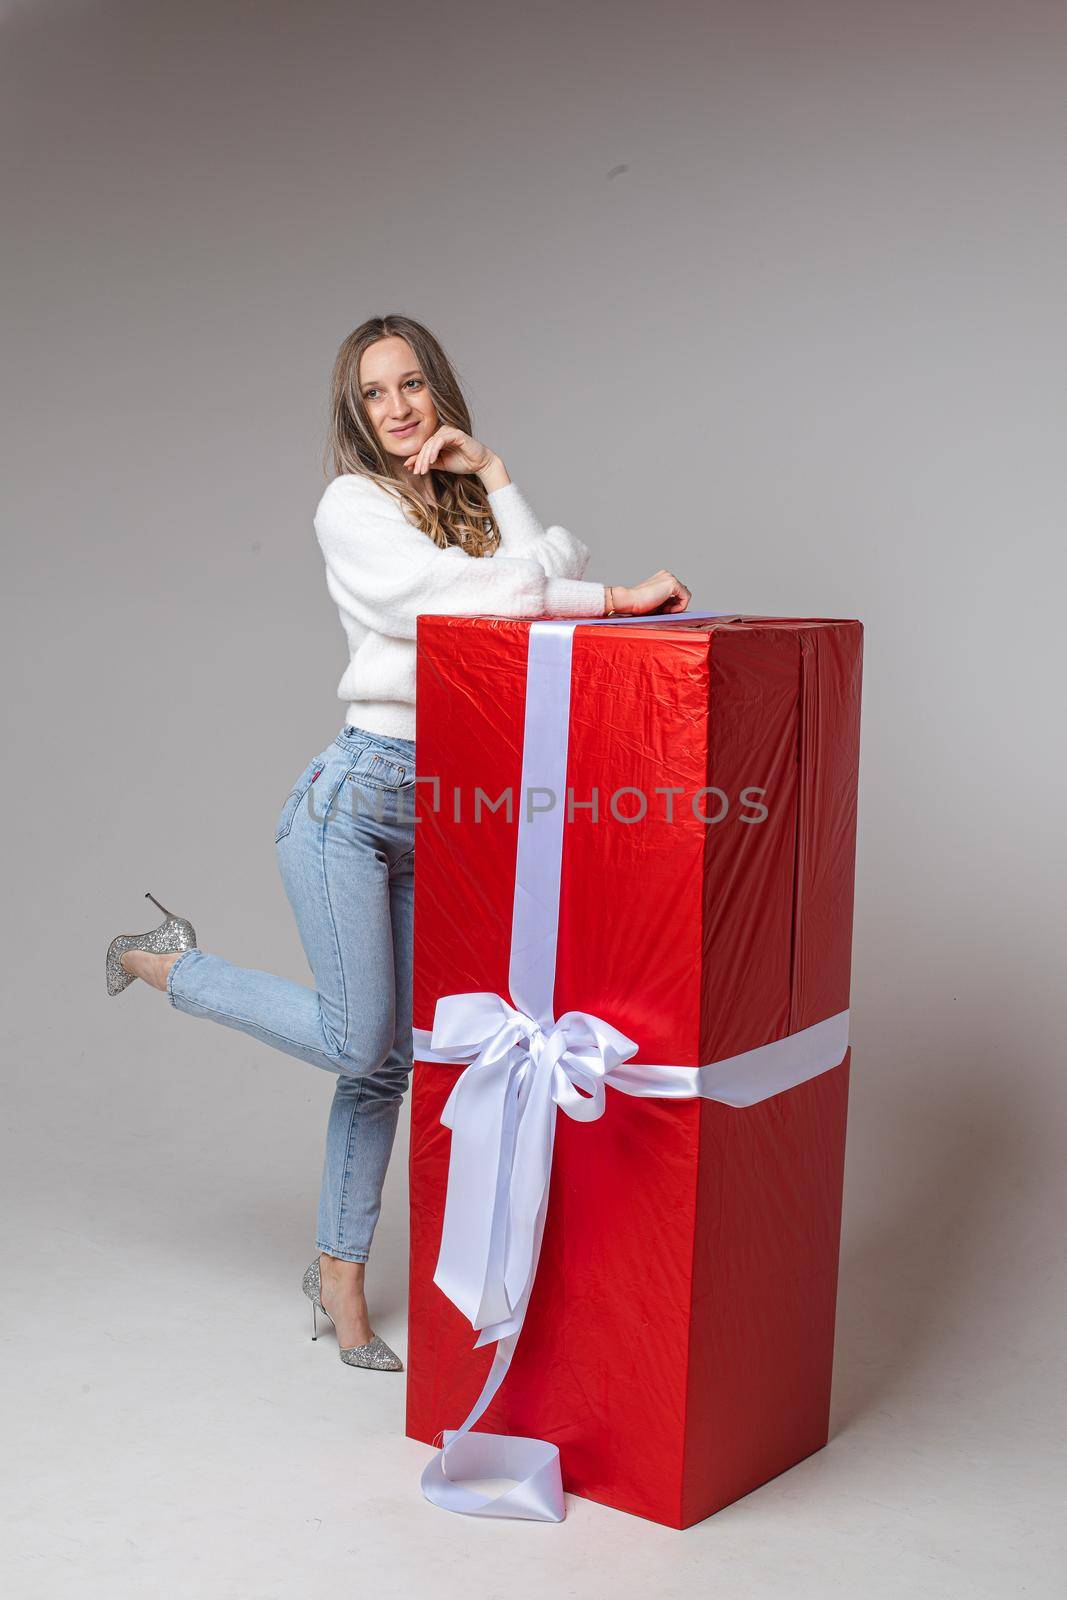 caucasian woman with attractive appearance rejoices of a big present for st. valentine's day, picture isolated on white background